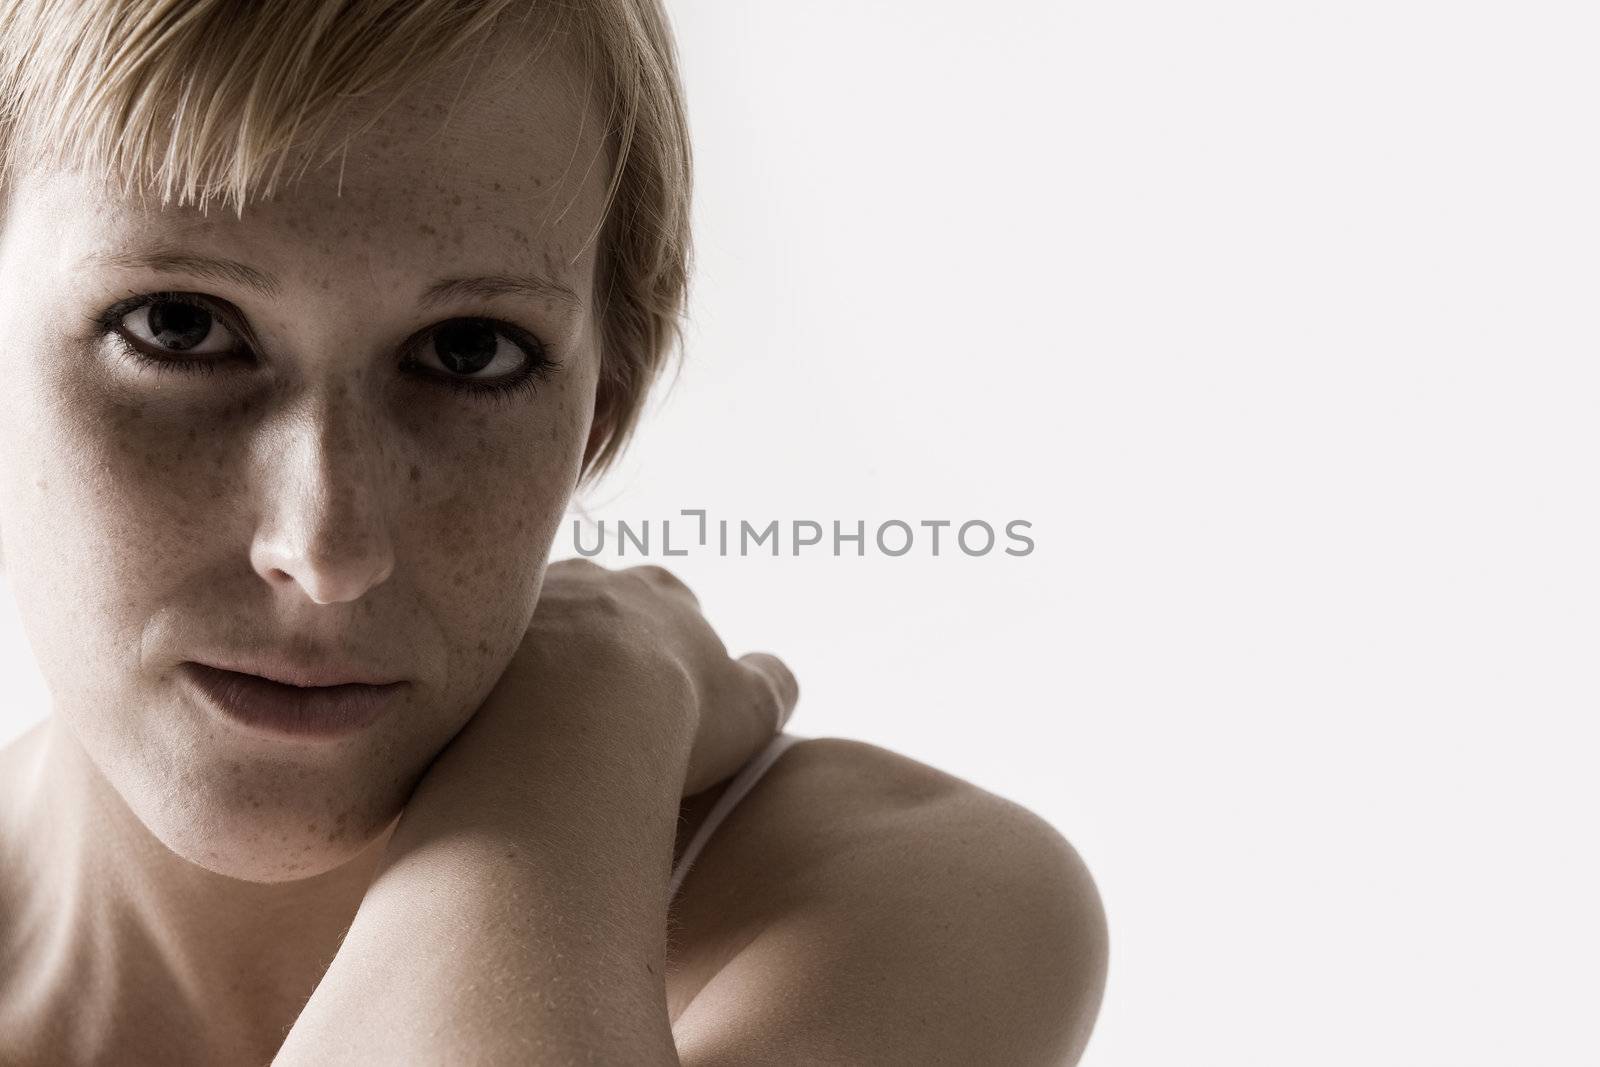 Studio portrait of a blond short haired girl looking sad